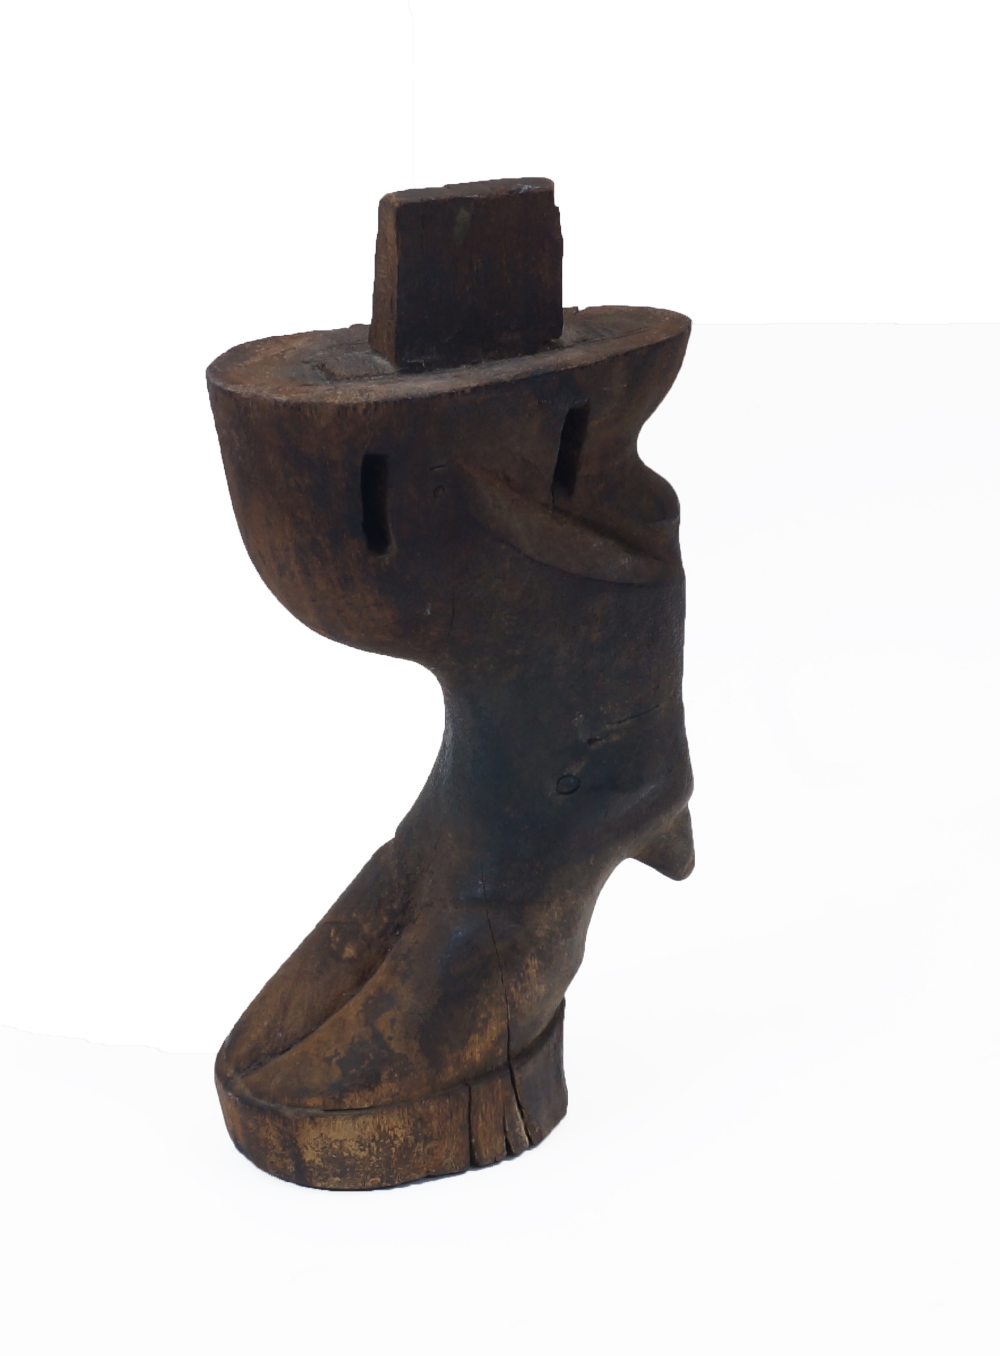 A carved hardwood table leg in the form of a cloven hoof, possibly Chinese, late 19th/early 20th